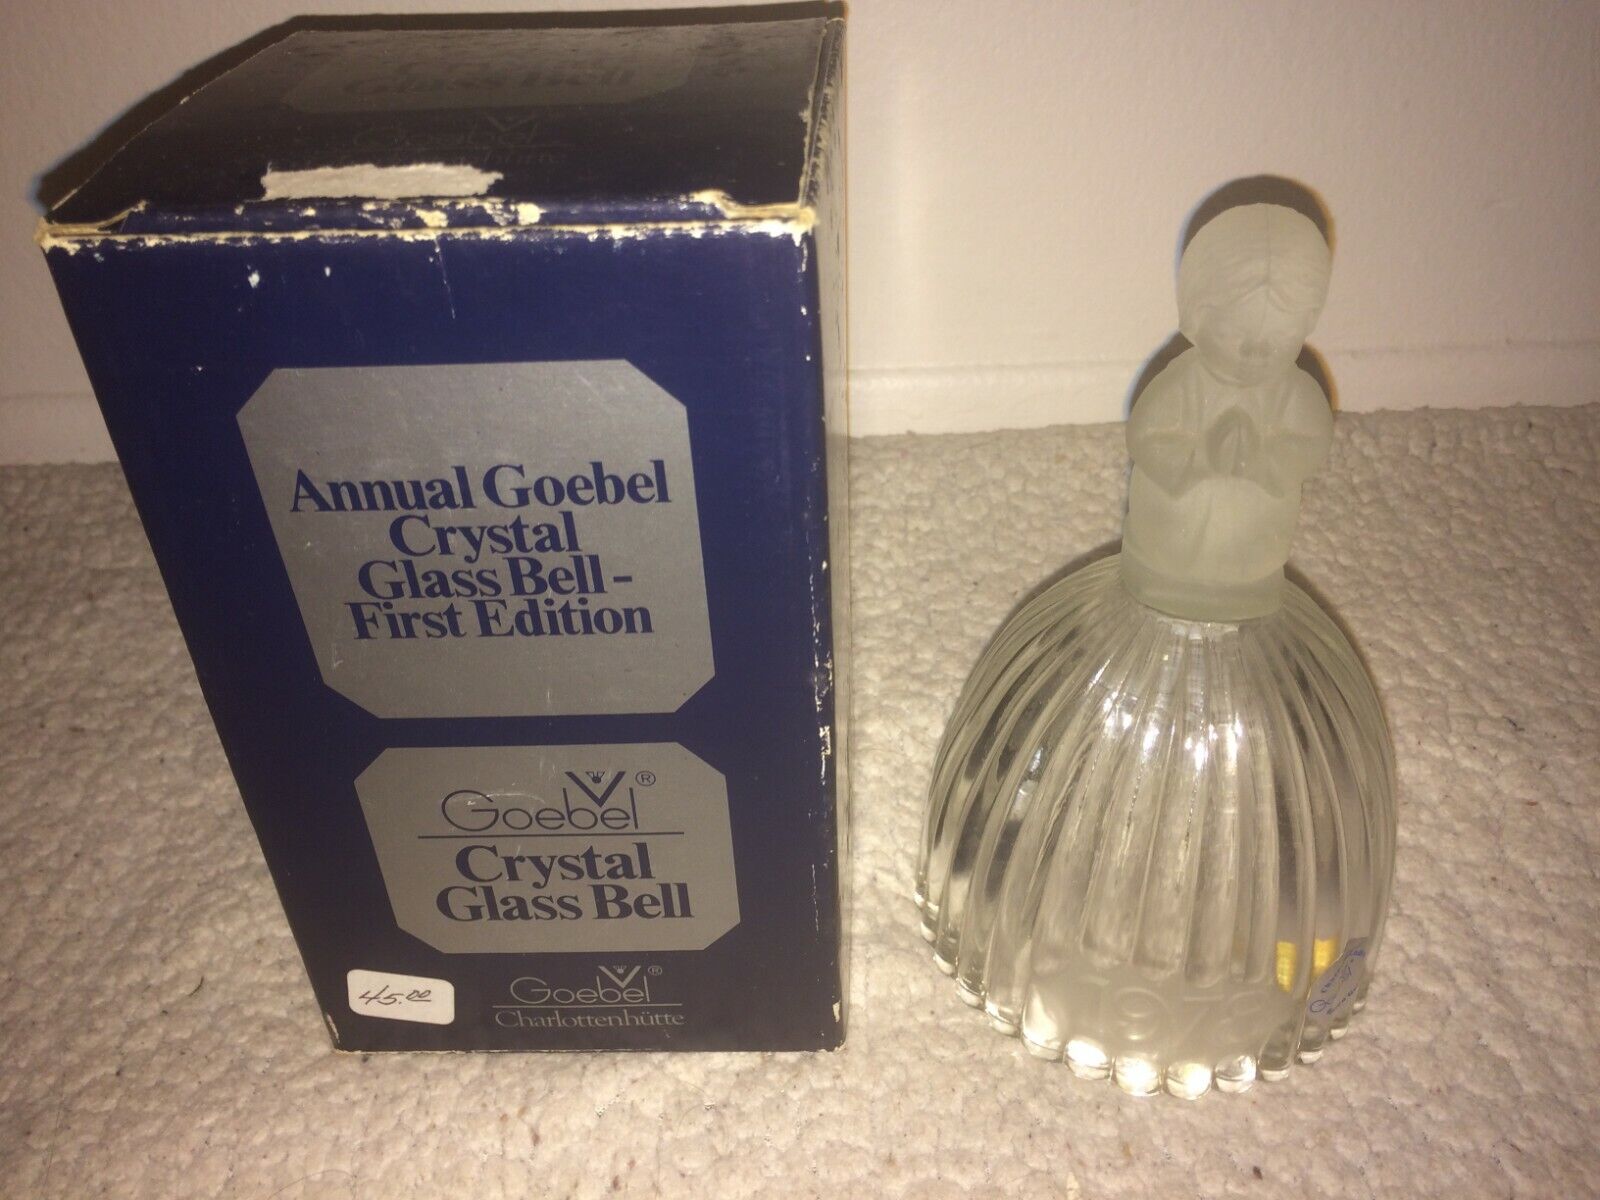 VINTAGE ANNUAL GOEBEL CRYSTAL GLASS BELL-FIRST EDITION 1978 - W. GERMANY - NOS